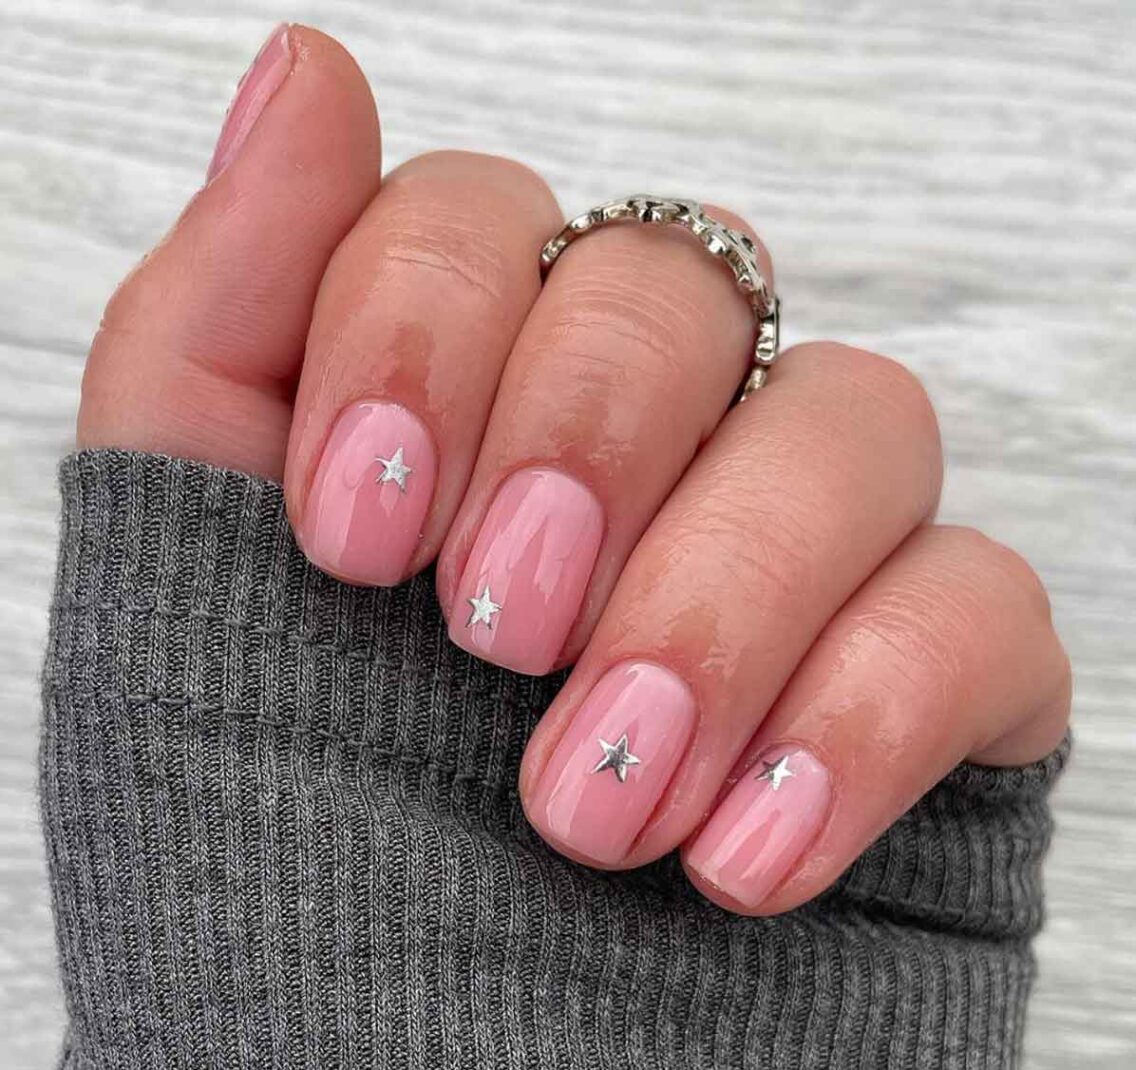 10 Cute Nail Designs That Are Perfect for Short Nails